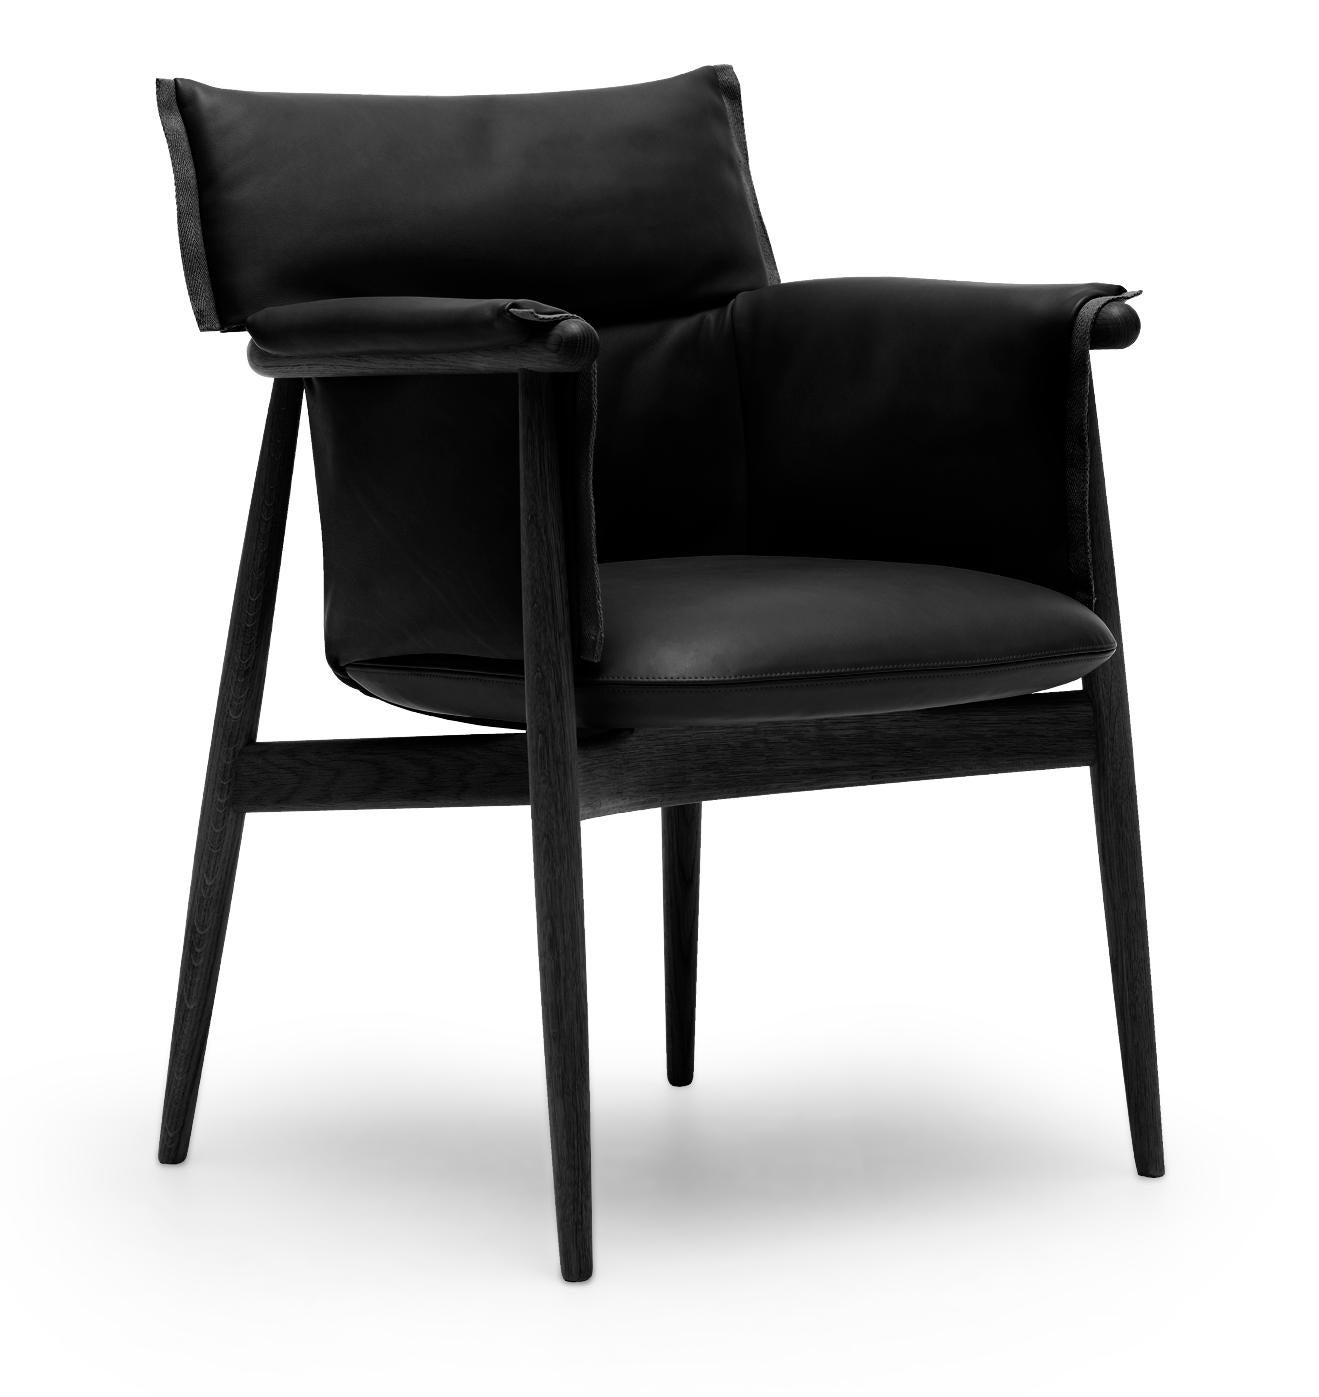 Black (Thor 301) E005 Embrace Dining Chair in Oak Painted Black with Black Edging Strip by EOOS 2